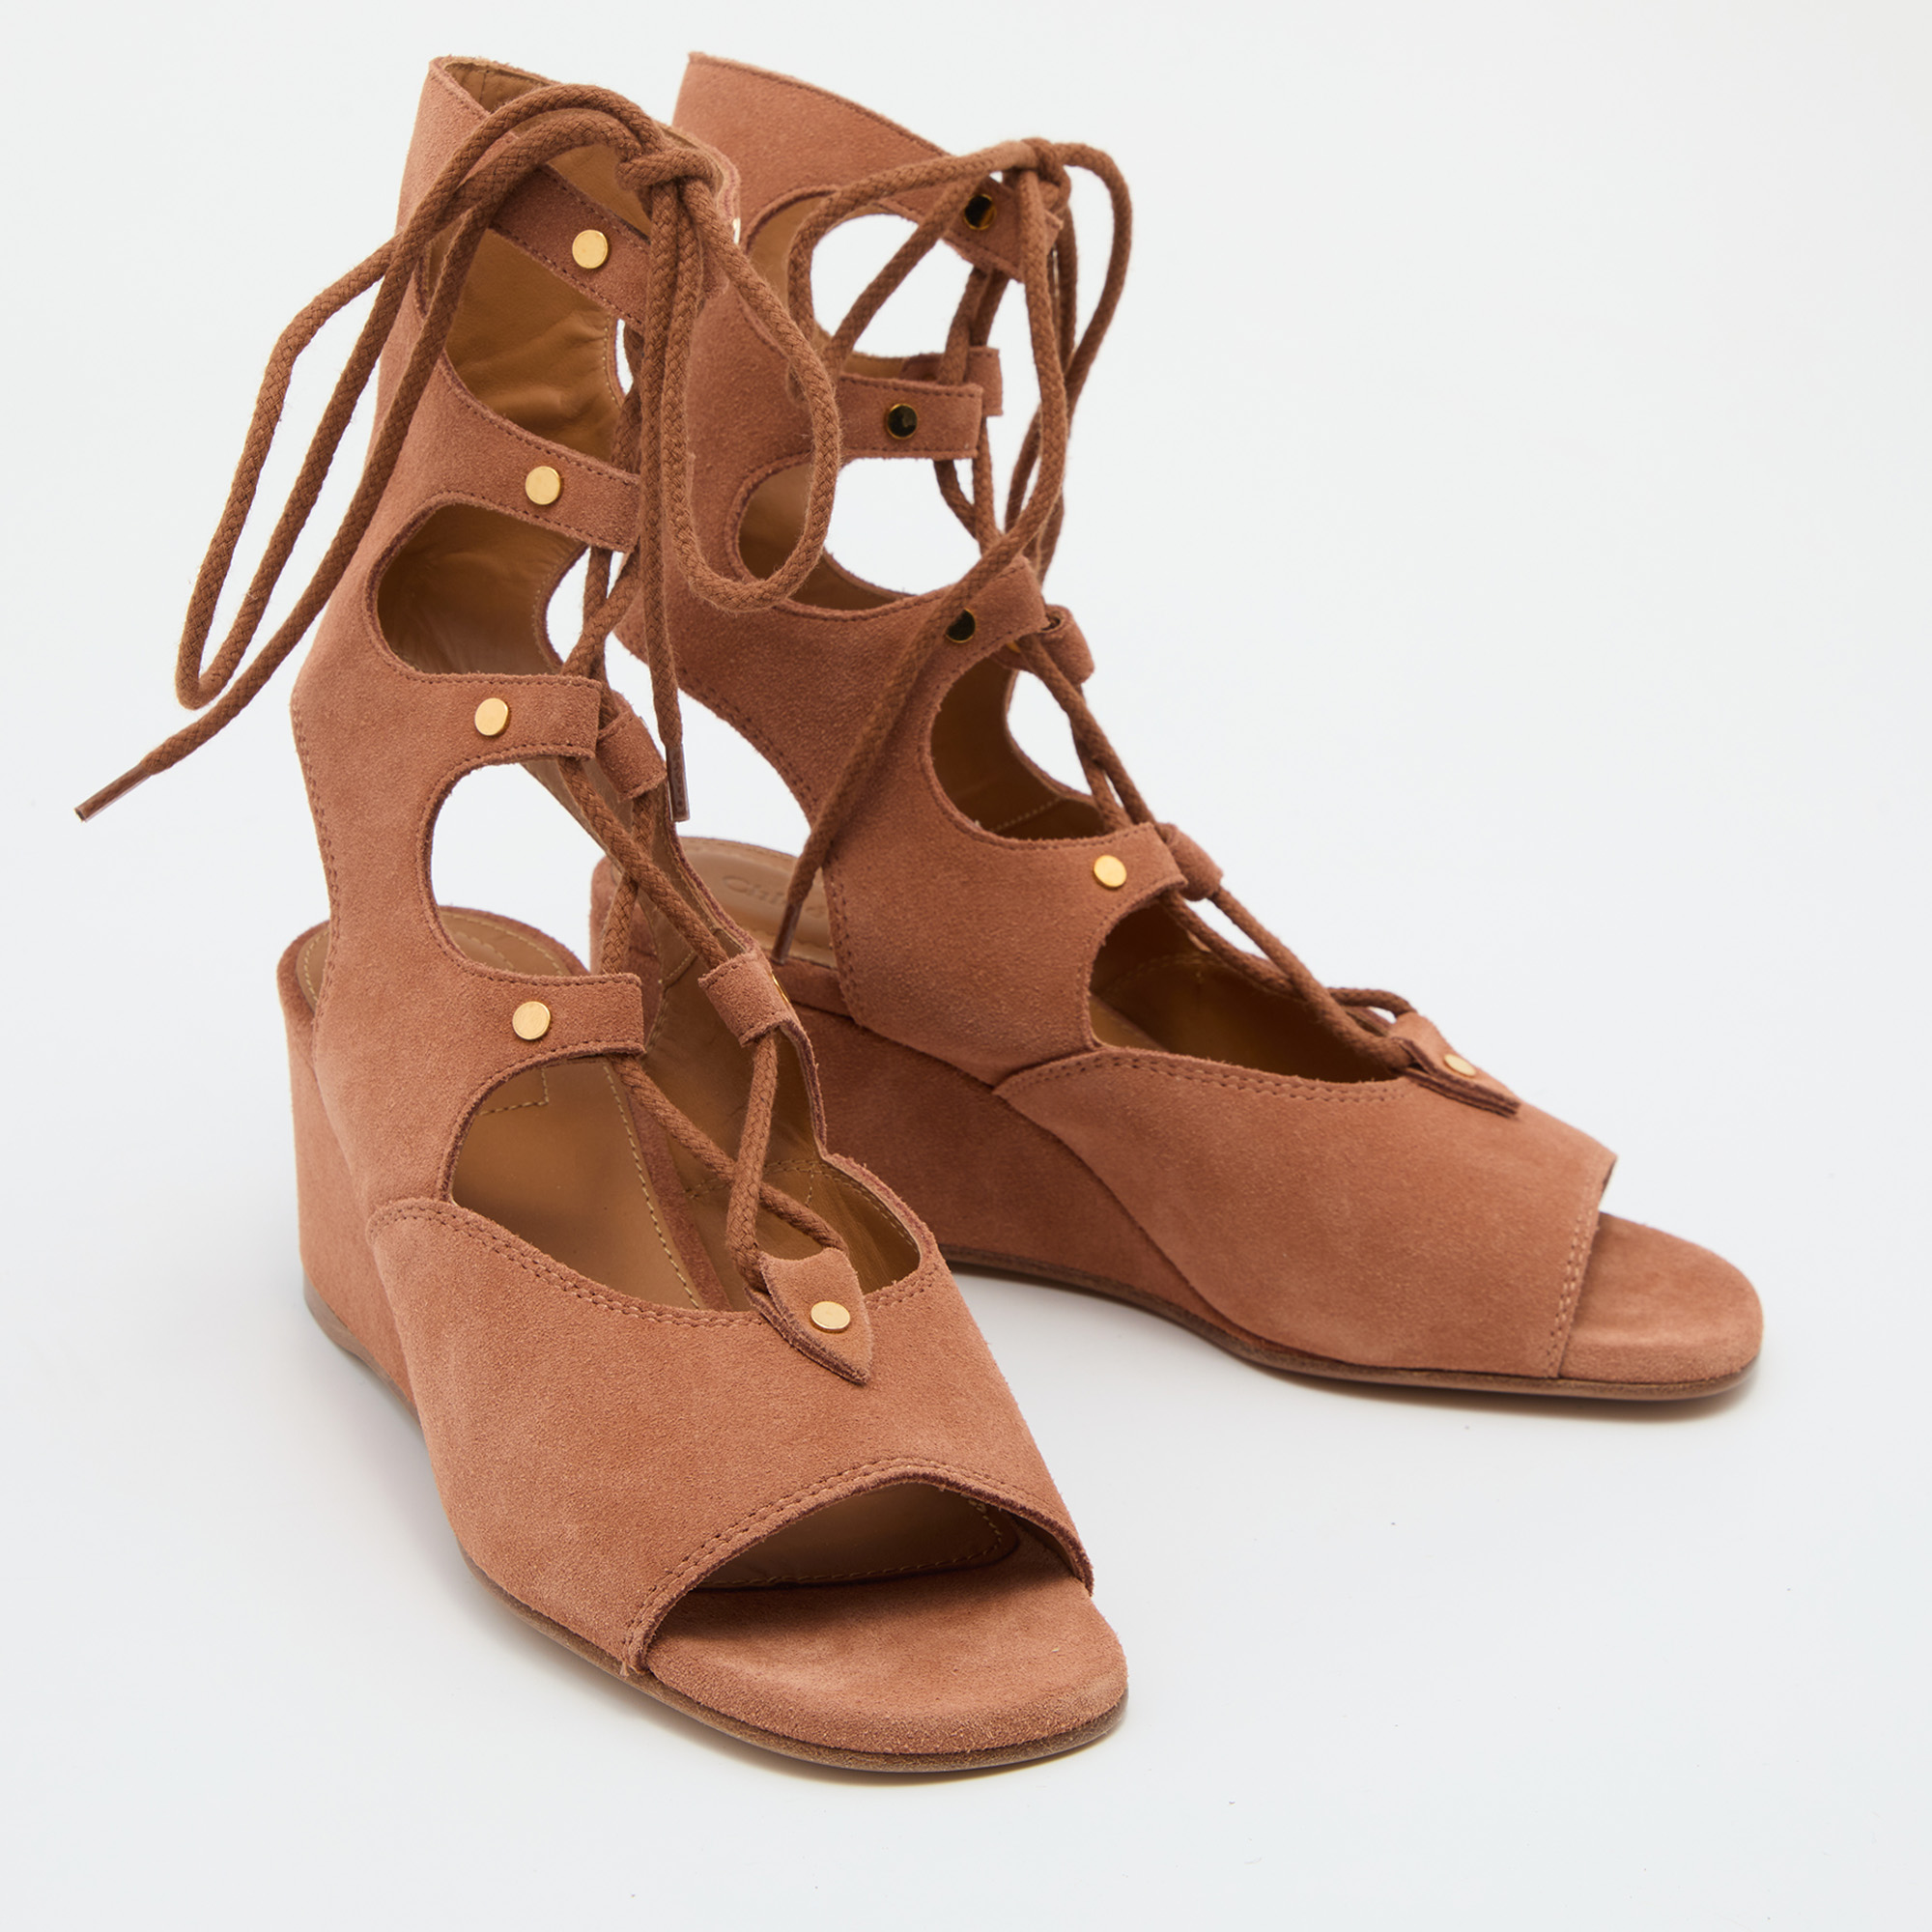 Chloe Brown Suede Caged Tie Up Ghillie Wedge Sandals Size 36